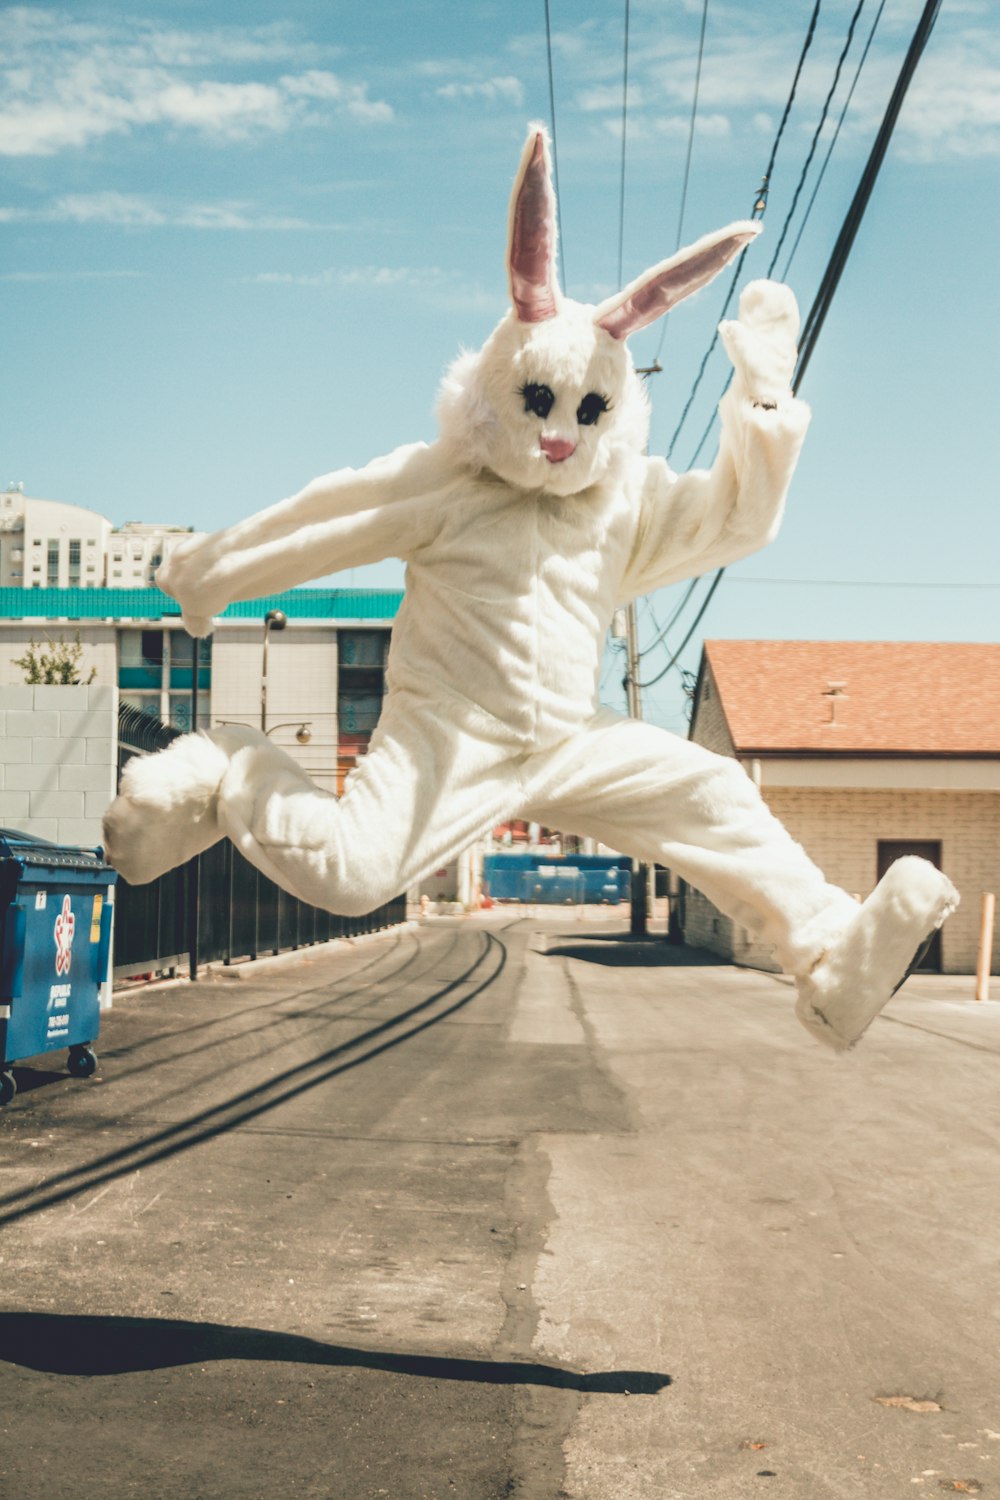 man in bunny costume in mid air in time lapse photography